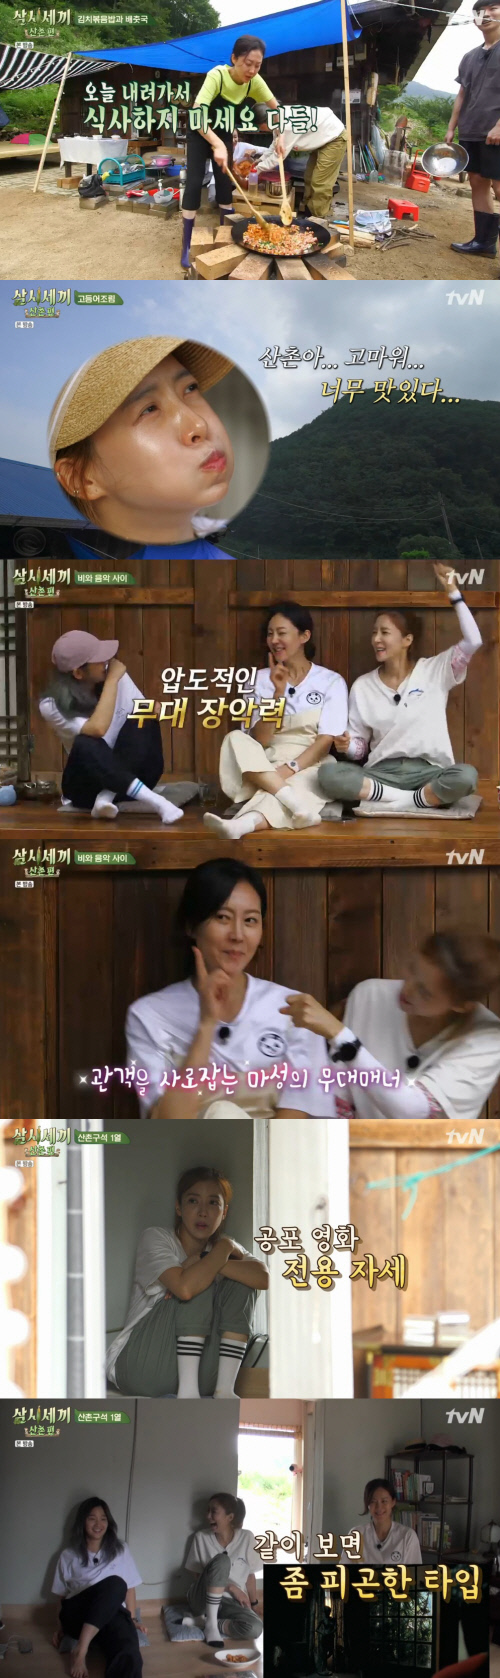 In the TVN entertainment program Three Meals a Day Mountain Village, which was broadcast on the afternoon of the 27th, the mountain life of Yum Jung-ah, Yoon Se-ah and Park So-dam was spread.On this day, guest Nam Joo-hyuk and members ate the refrigerator ingredients and made kimchi fried rice and cabbage soup.Nam Joo-hyuk, who didnt even put in the rice but saw a pot full of ingredients, was also in awe; breakfast dishes were washed, and the order was Nam Joo-hyuk.After finishing the dishes, I could not sit still and found a job and made Yum Jung-ah laugh.After eating, the members spent a lot of time drinking coffee.Yum Jung-ah and Yoon Se-ah sat on the floor from Sim Su-bongs Binari to sleep in the bus, and opened a karaoke room in the mountain village and laughed.I watched the horror movie Janghwa Hongryeon starring Yum Jung-ah.In 2003, I was amazed at the appearance of Yum Jung-ah, who was at the time, but I watched the movie with a cry of fear.Nam Joo-hyuk, who laughed at his sisters throughout the stay, left, Yum Jung-ah, Yoon Se-ah, and Park So-dam, who spent a lot of fun at the three-house house where Autumn came.At the end of the broadcast, Park Seo-joon appeared as a new guest, raising expectations for next weeks broadcast.Park Seo-joon - Park So-dams chemistry, which has been in the movie Parasites together, has also raised questions.Photo  TVN Broadcast Screen Capture